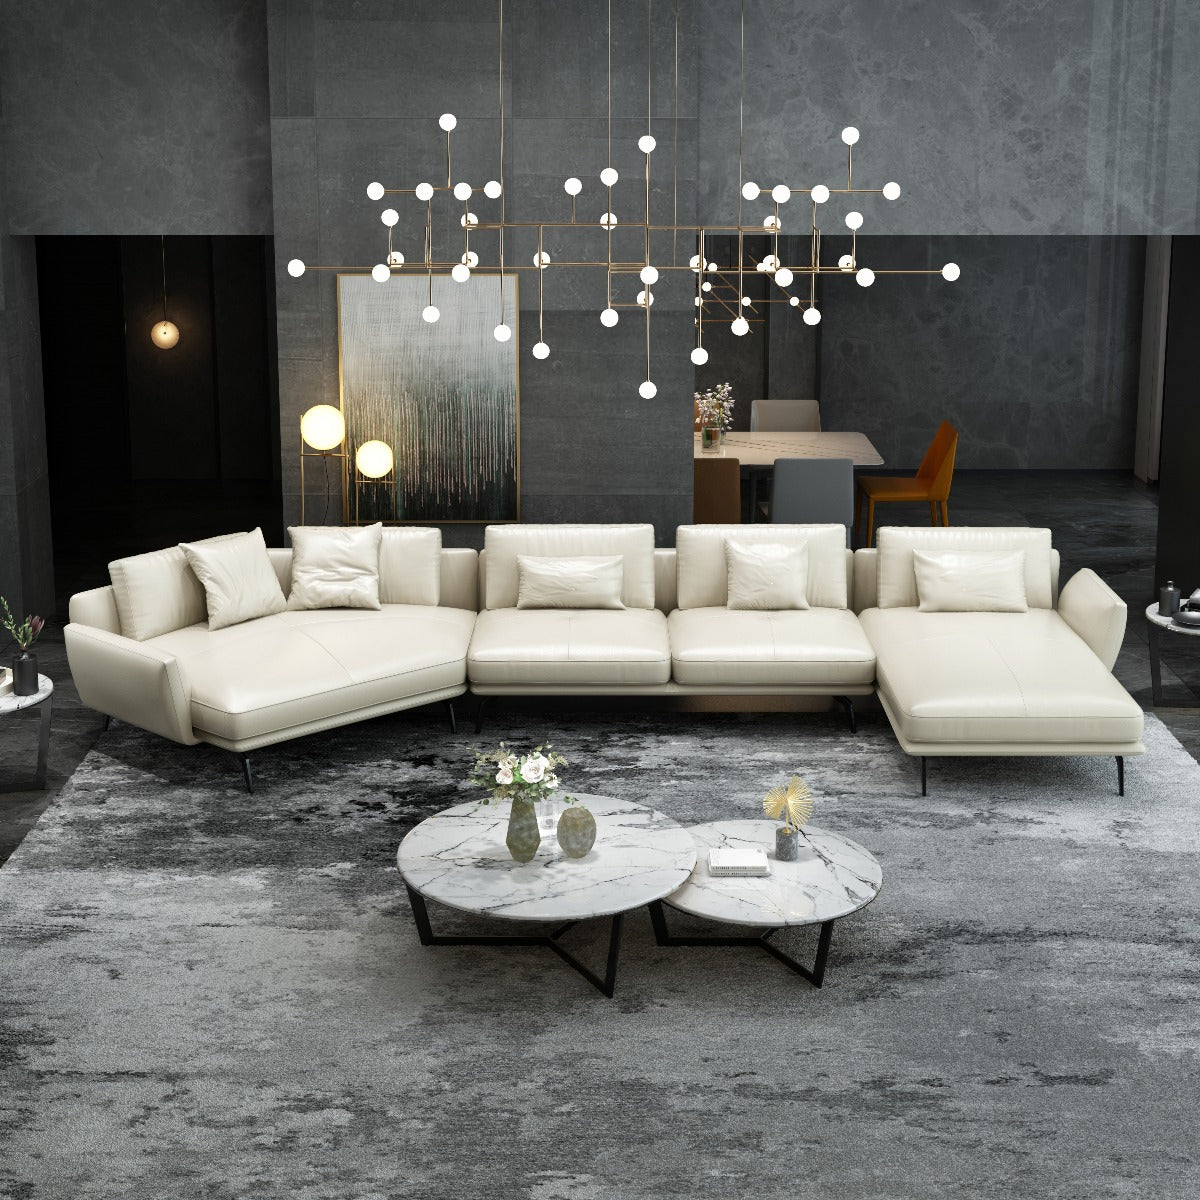 European Furniture - Santiago Sectional in Italian White Leather - 83543R-3RHF - New Star Living